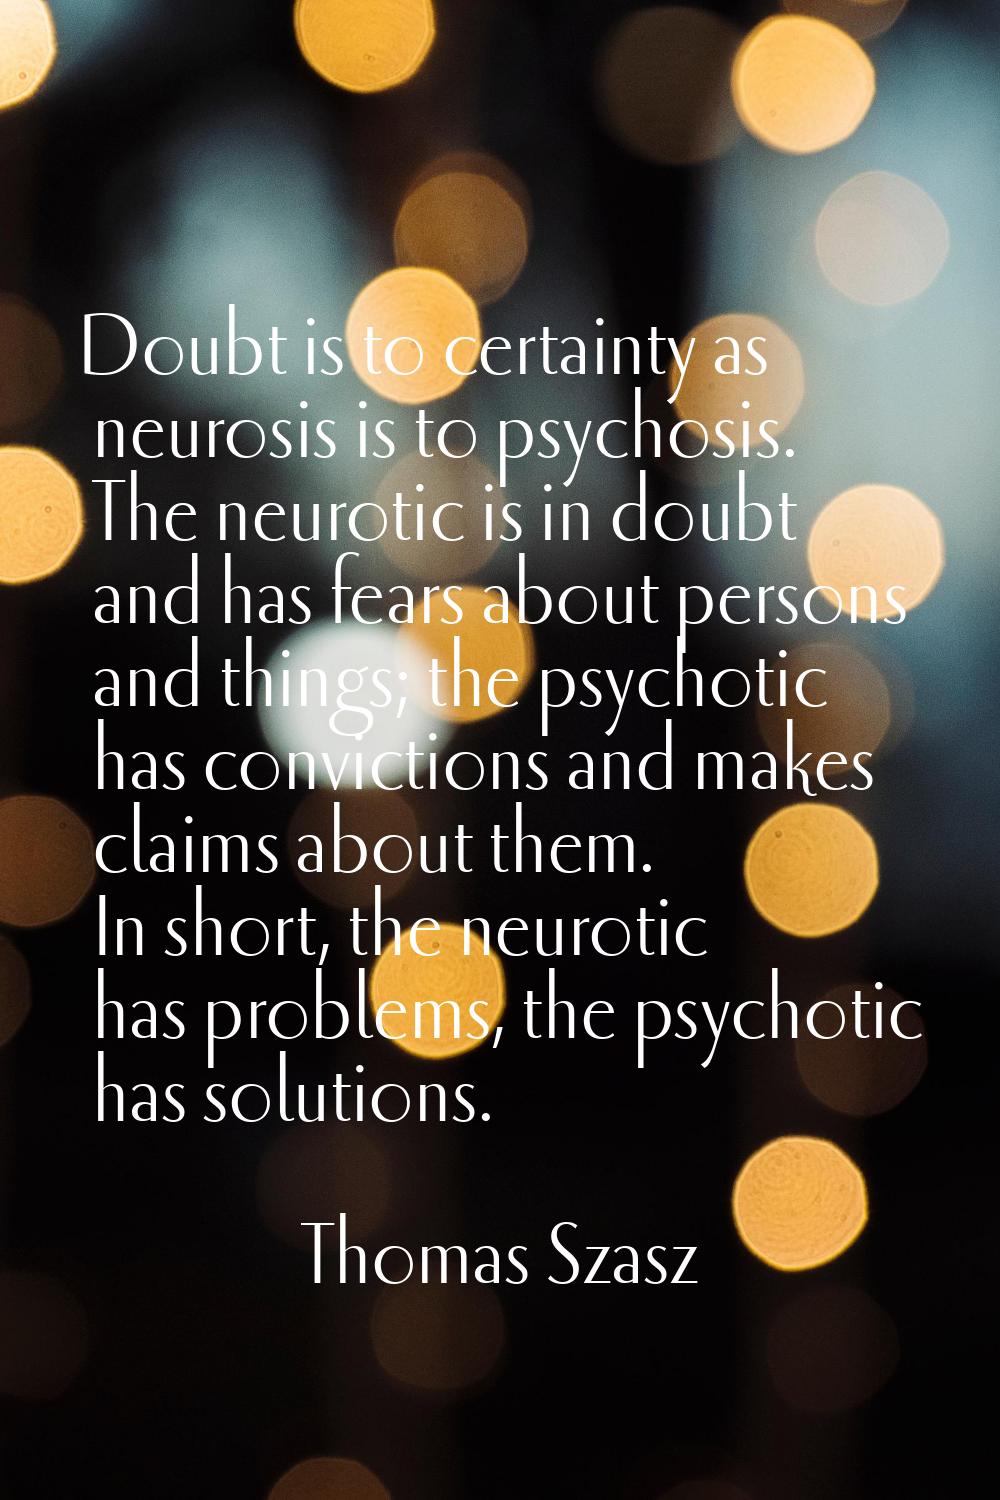 Doubt is to certainty as neurosis is to psychosis. The neurotic is in doubt and has fears about per